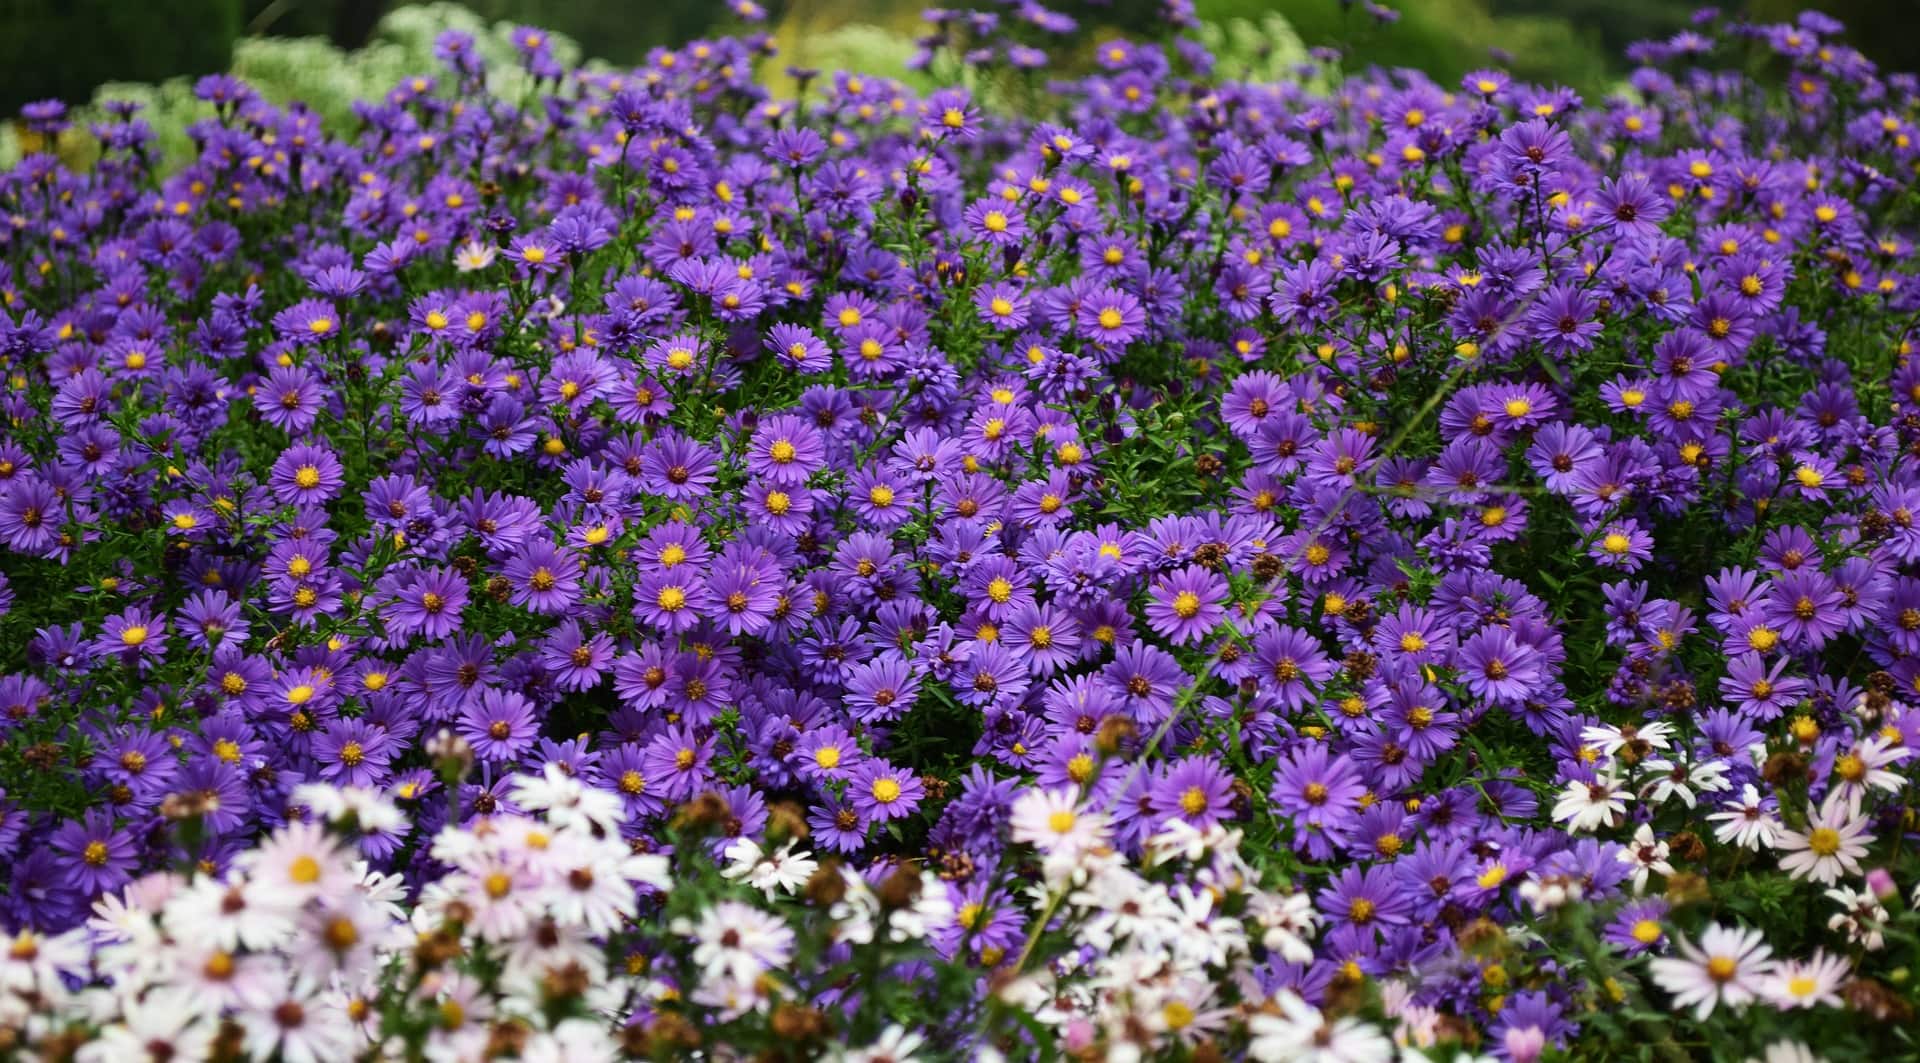 lots of purple asters across most of the picture; a few white ones in a strip along the lower edge